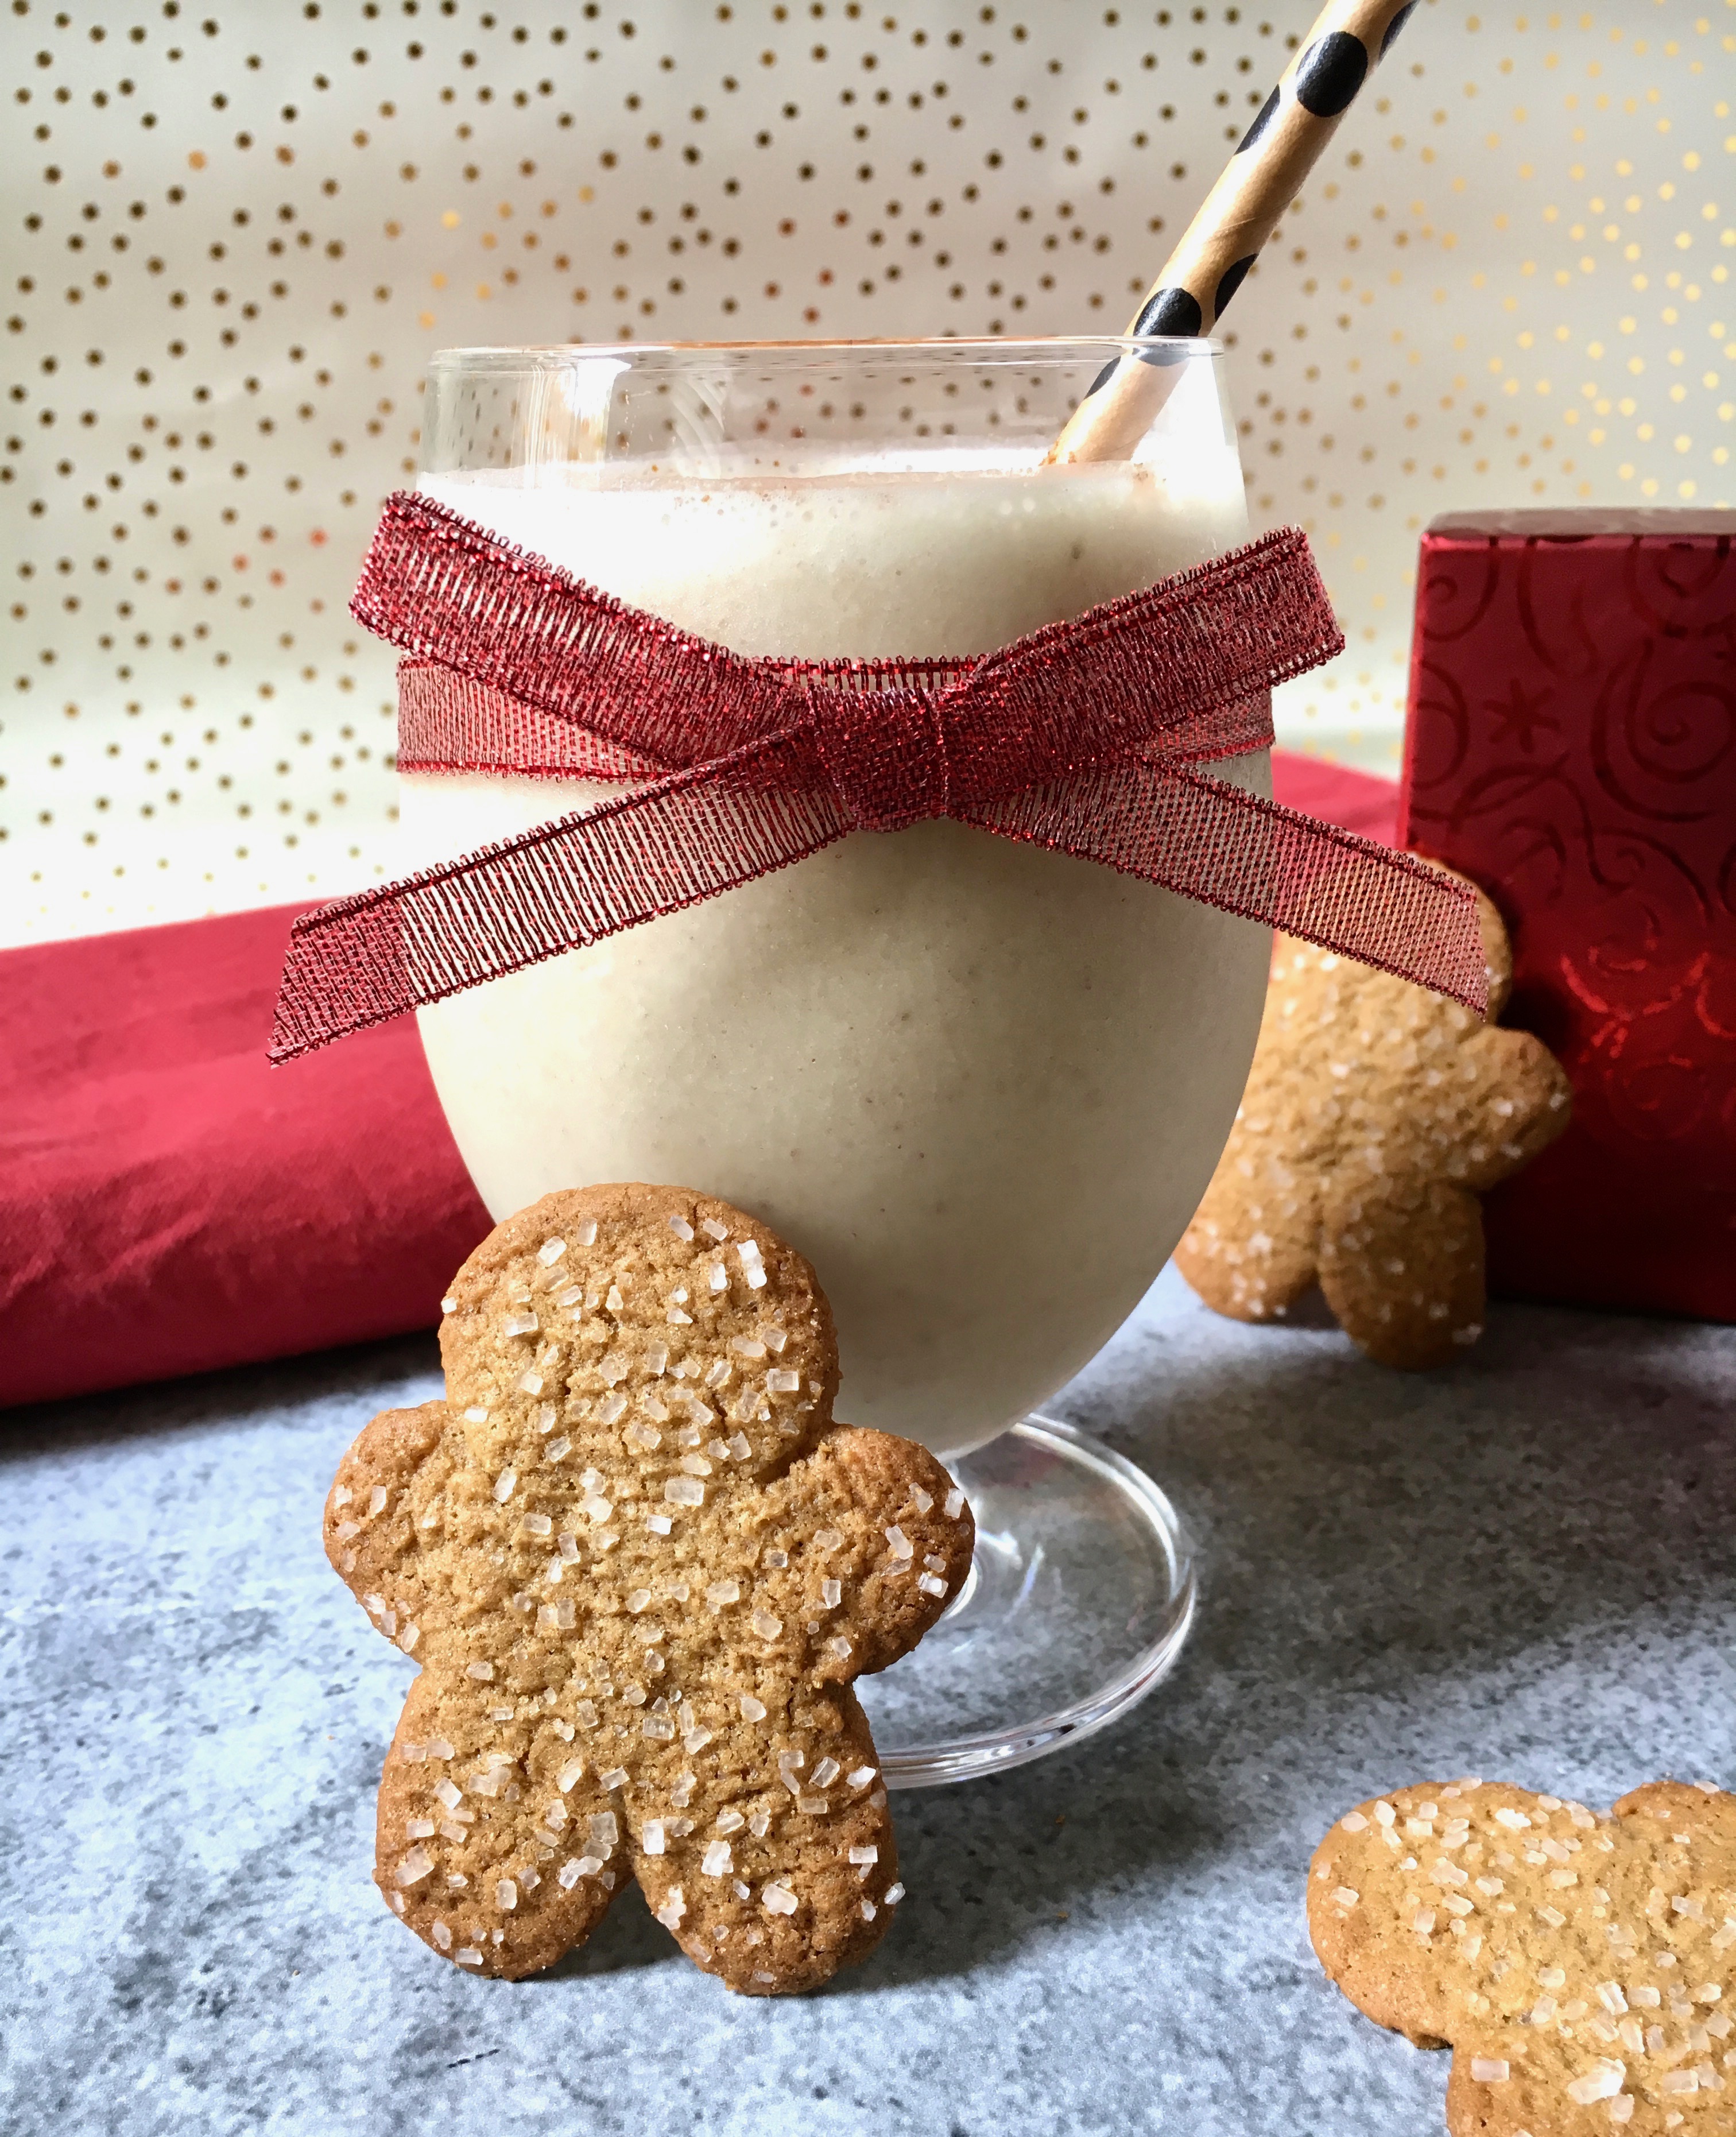 Healthy Gingerbread Protein Smoothie